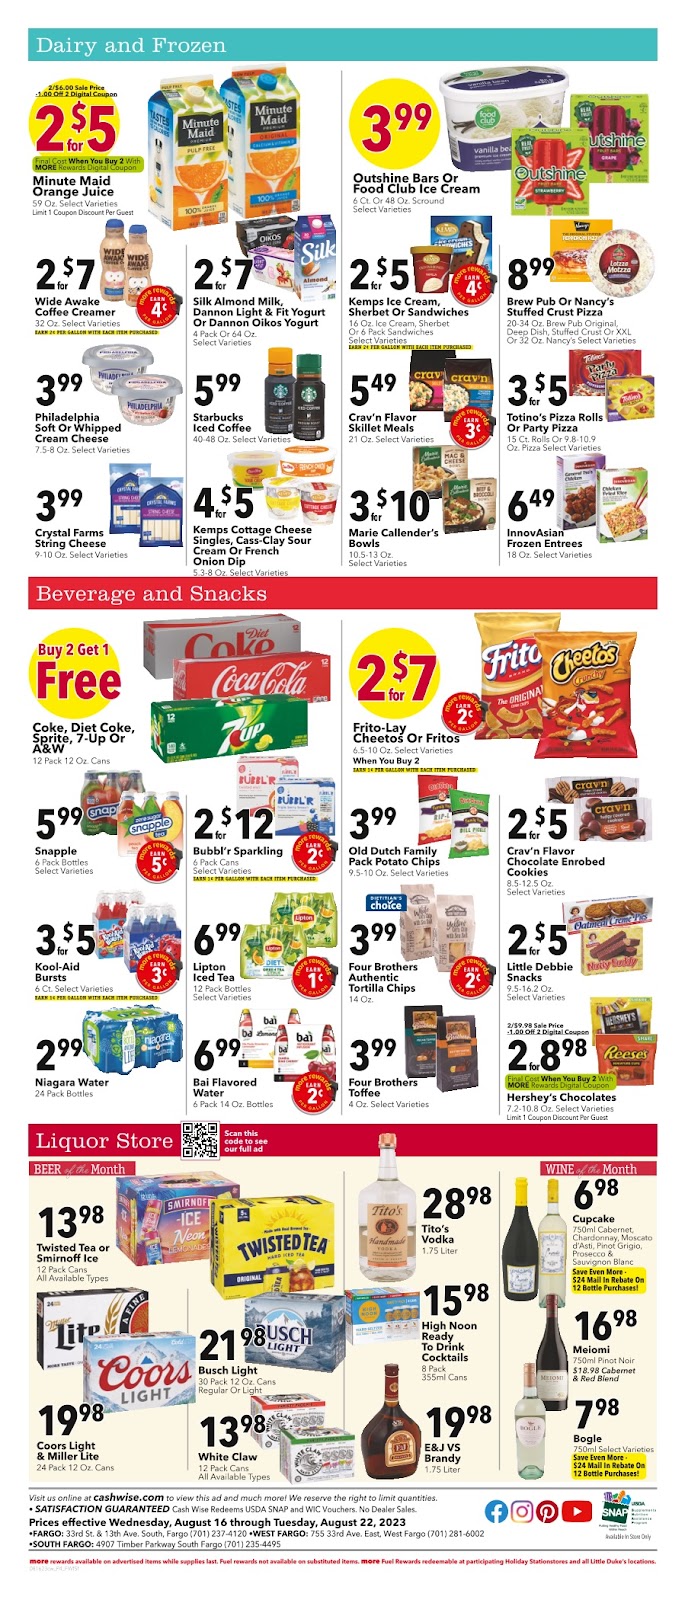 Cash Wise Weekly Ad - 6